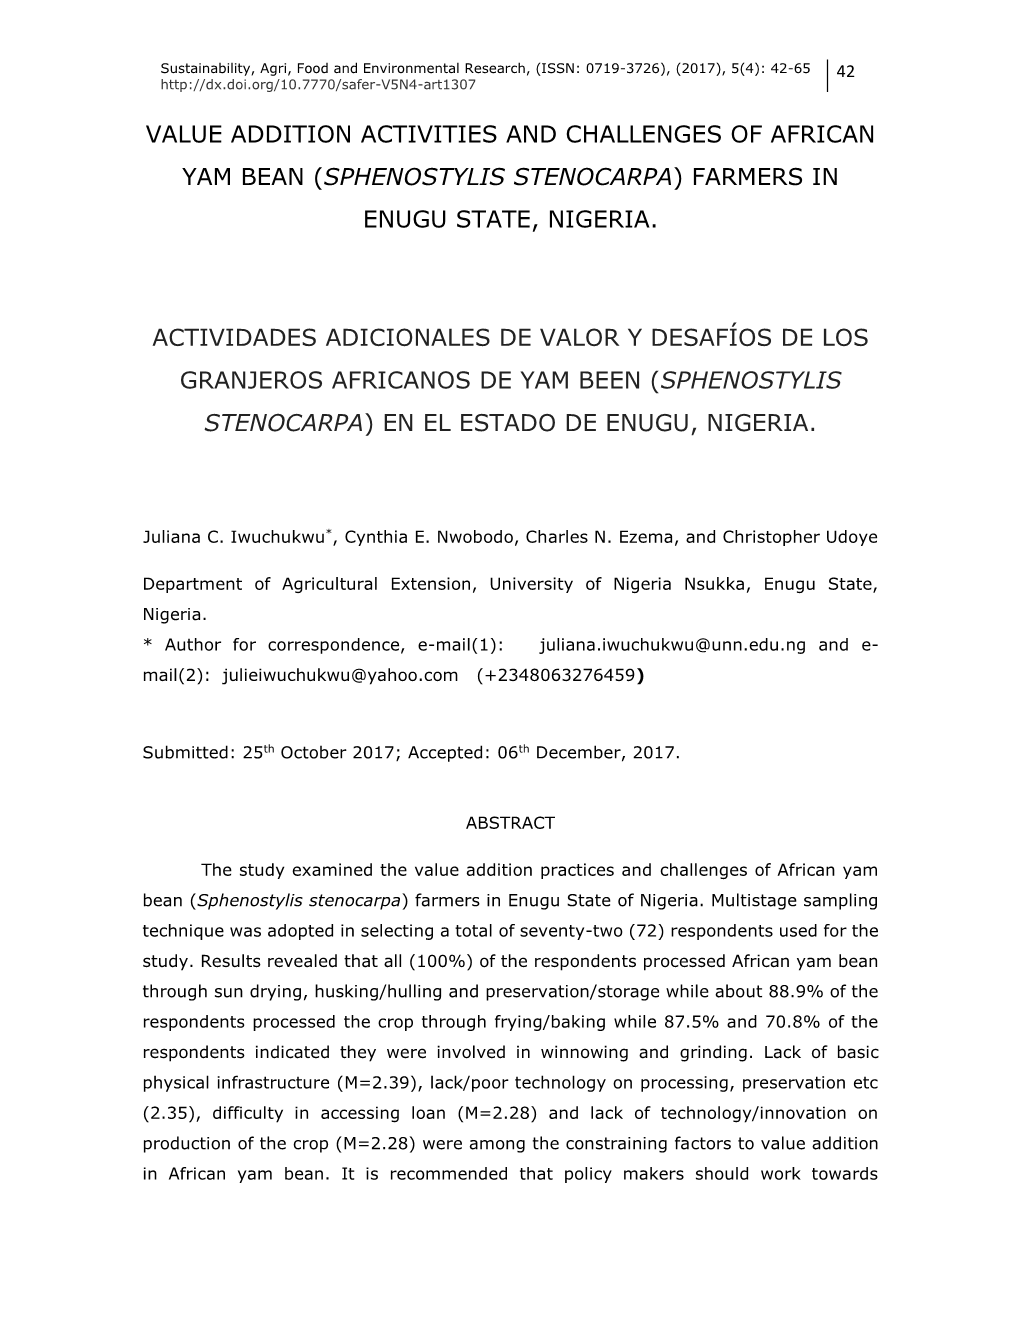 Value Addition Activities and Challenges of African Yam Bean (Sphenostylis Stenocarpa) Farmers in Enugu State, Nigeria. Activida